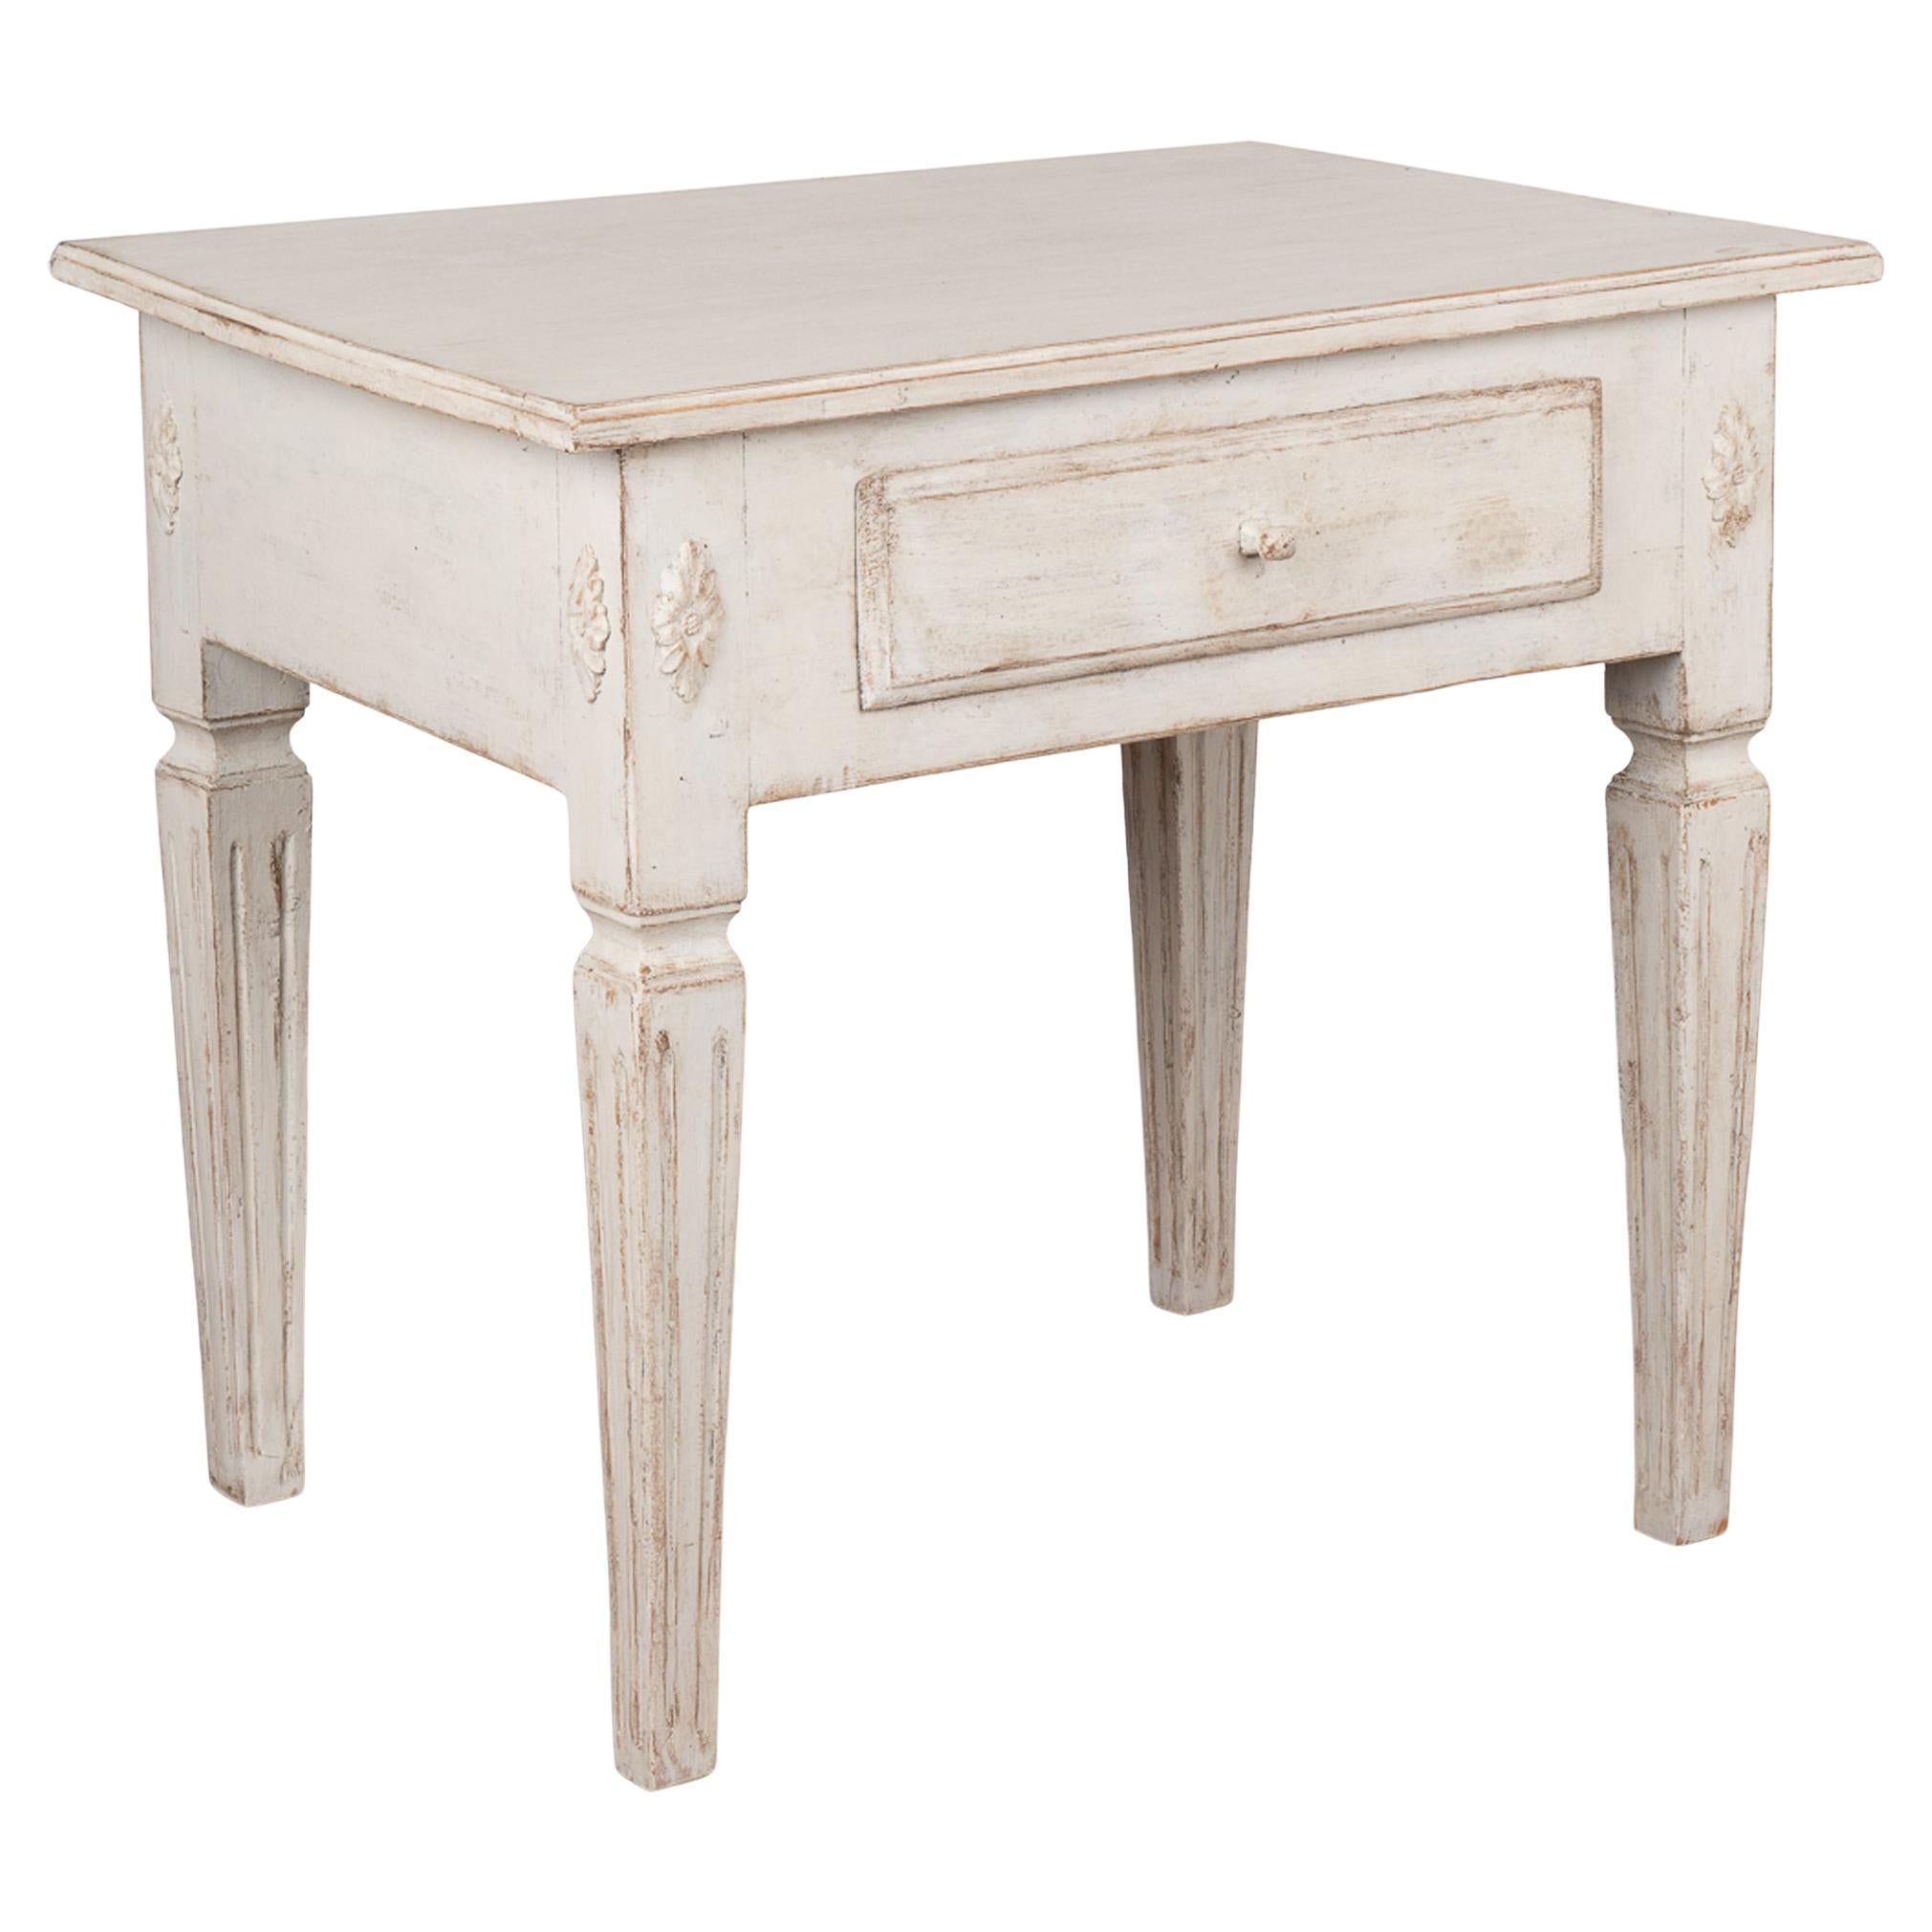 Antique Swedish Gustavian White Painted Side Table With Drawer, circa 1840-60 For Sale